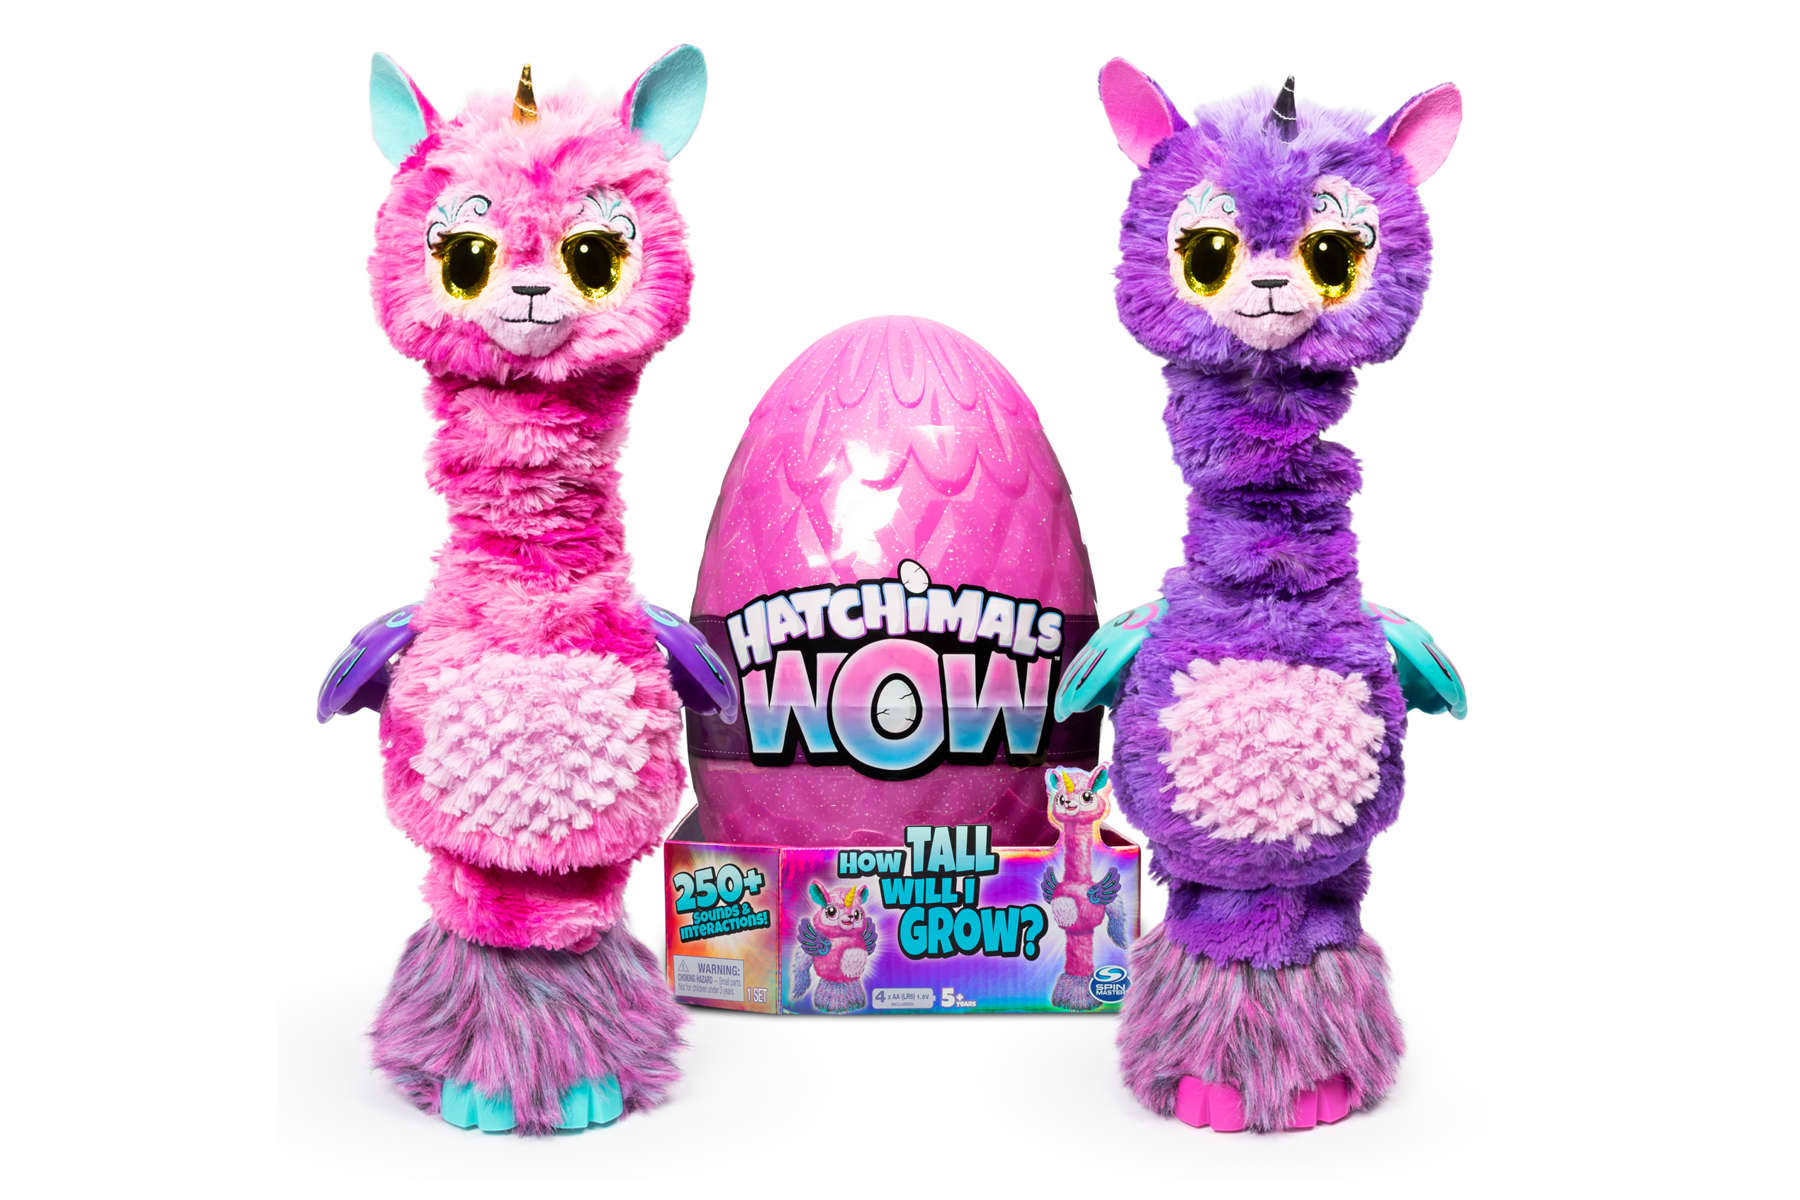 How Hatchimals and Fingerlings toymakers come up with ideas